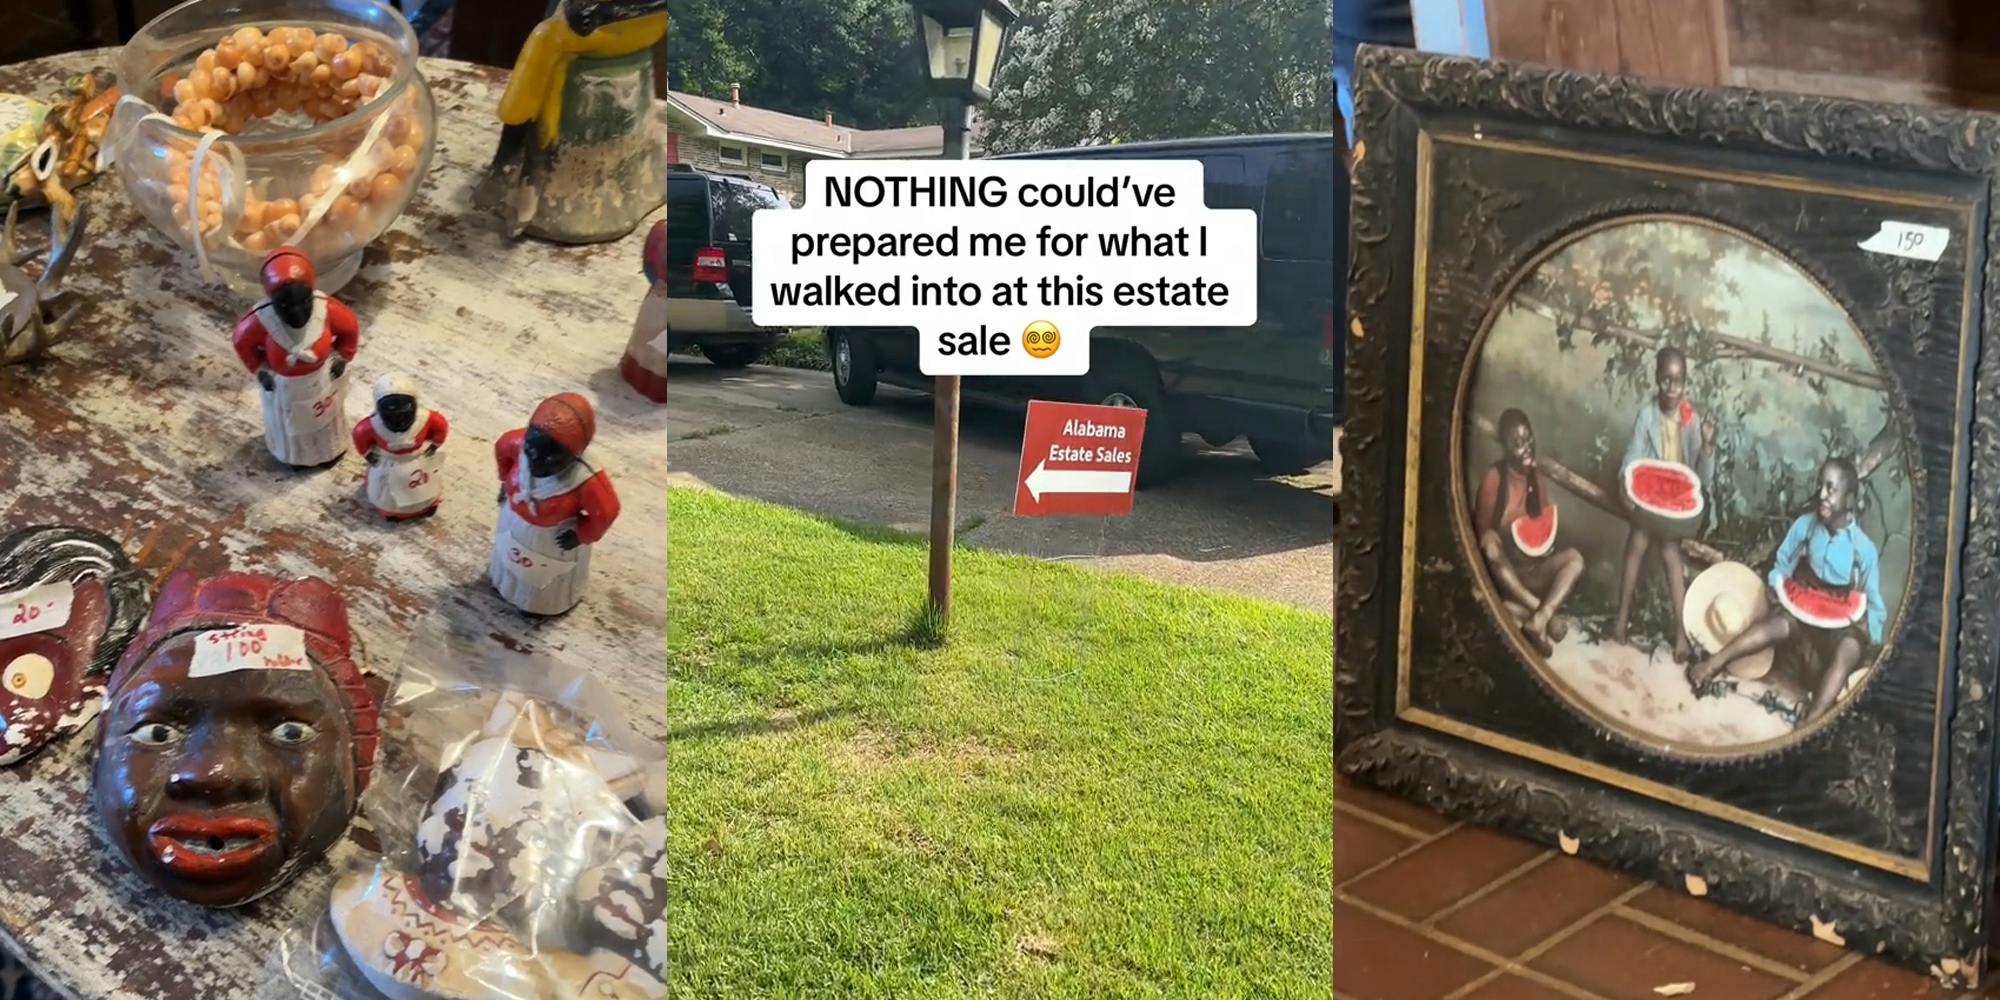 racist ceramic items on table at estate sale (l) Alabama Estate Sales sign outside on yard with caption "NOTHING could've prepared me for what I walked into at this estate sale" (c) racist painting with price tag at estate sale" (r)